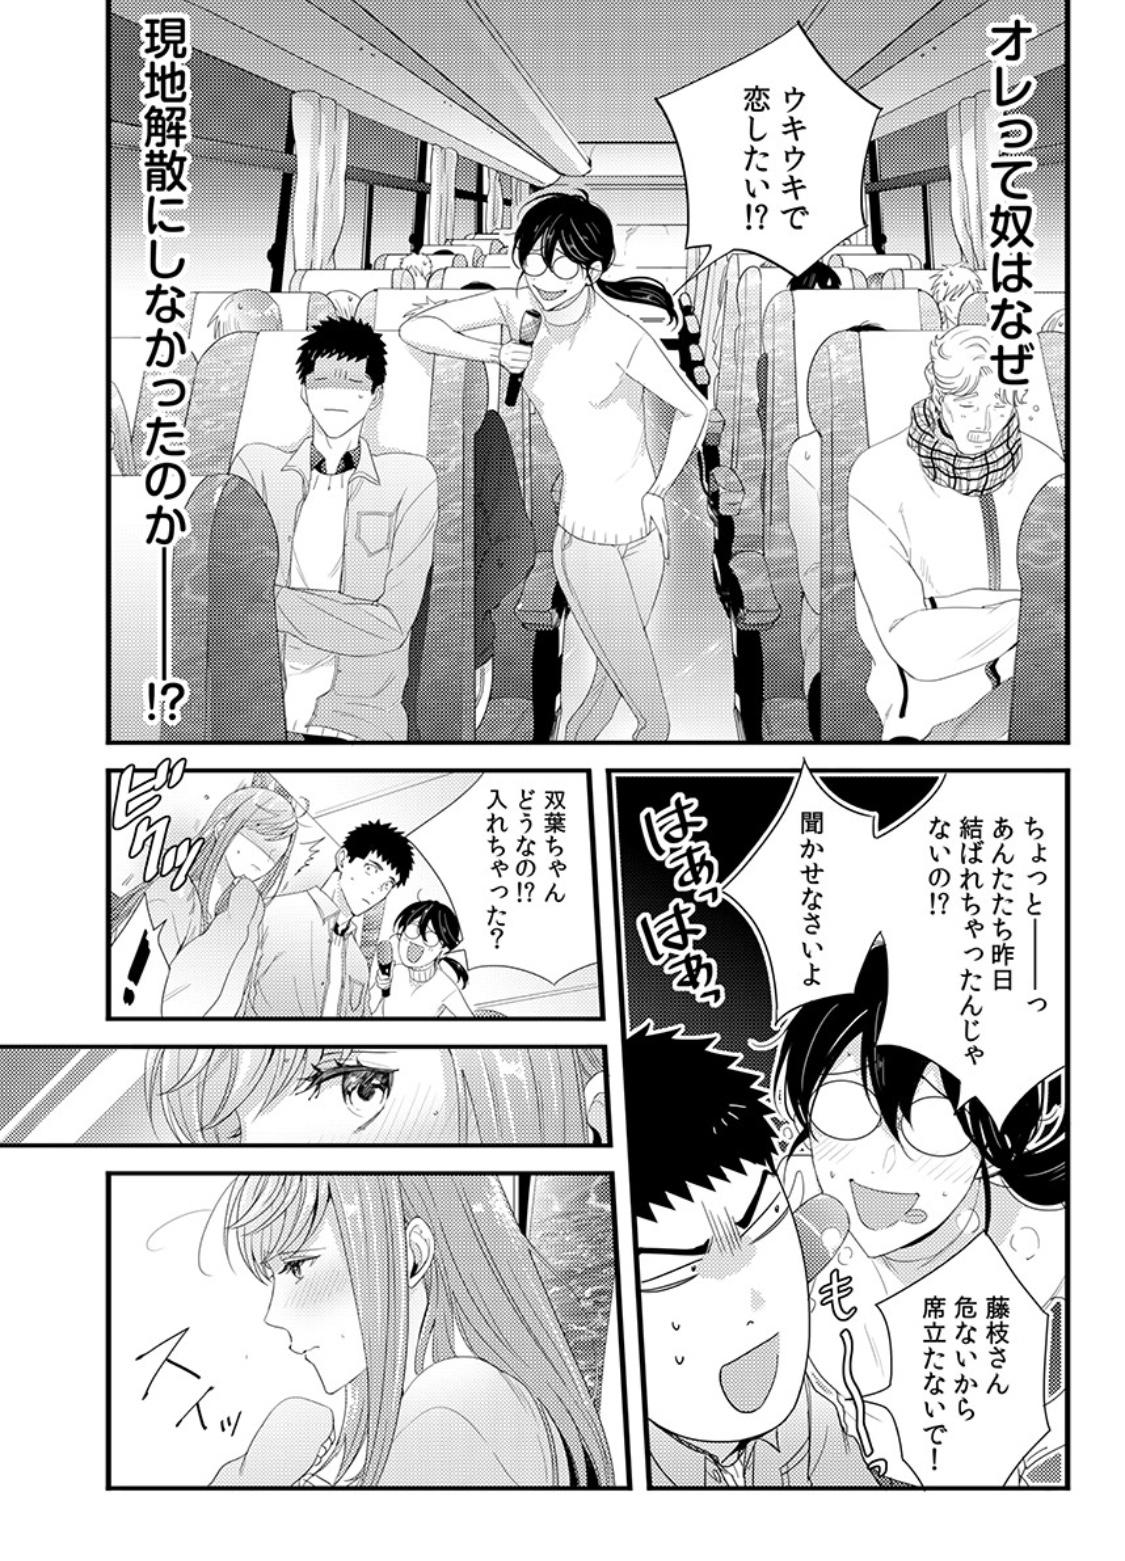 Please Let Me Hold You Futaba-San! Ch. 1-4 29